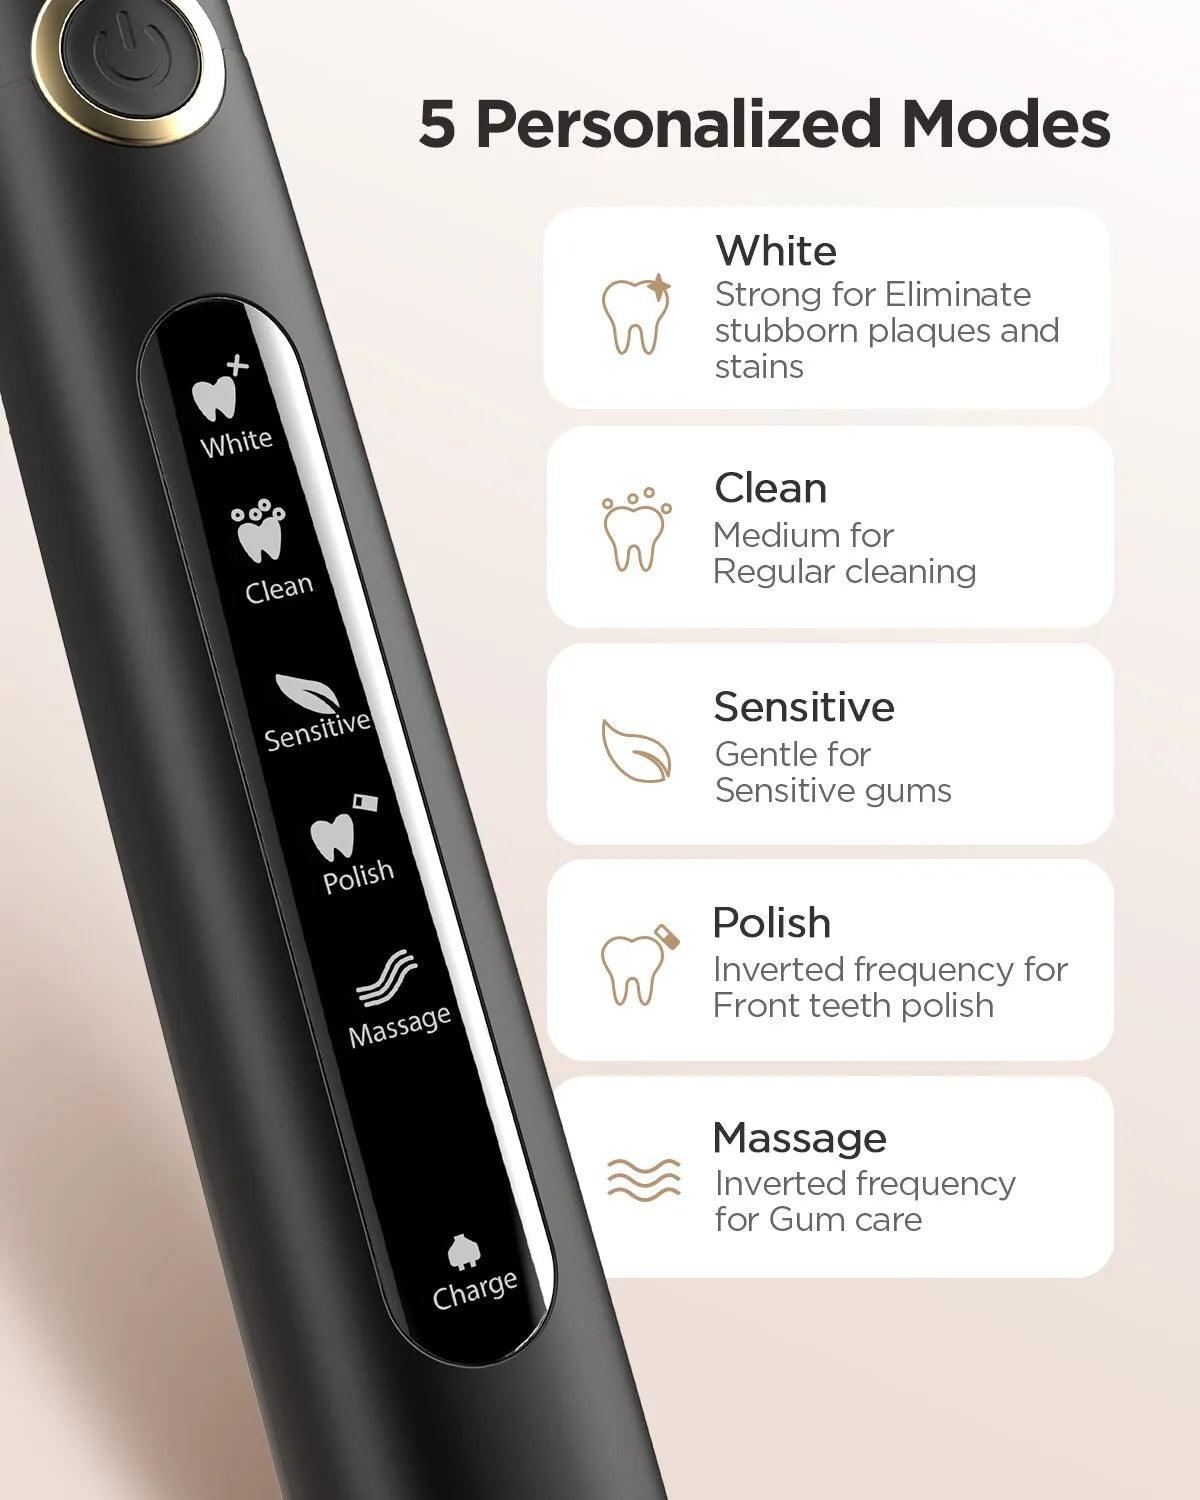 Advanced Sonic Electric Toothbrush with USB Charging - Replaces Manual Brush Strokes - 5 Cleaning Modes & Replacement Heads included  ourlum.com   